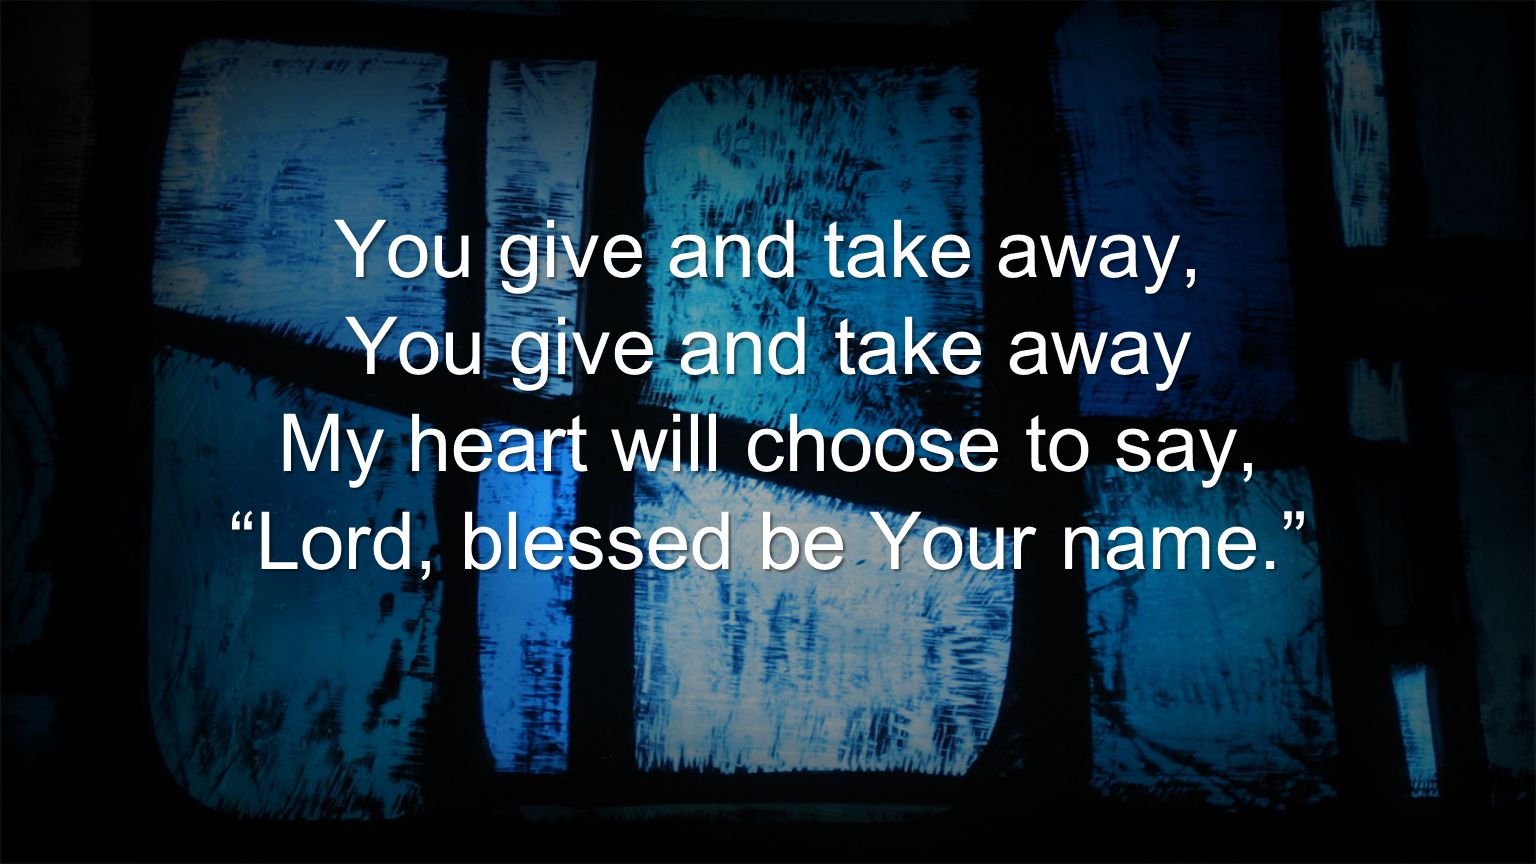 My heart will choose to say, Lord, blessed be Your name.